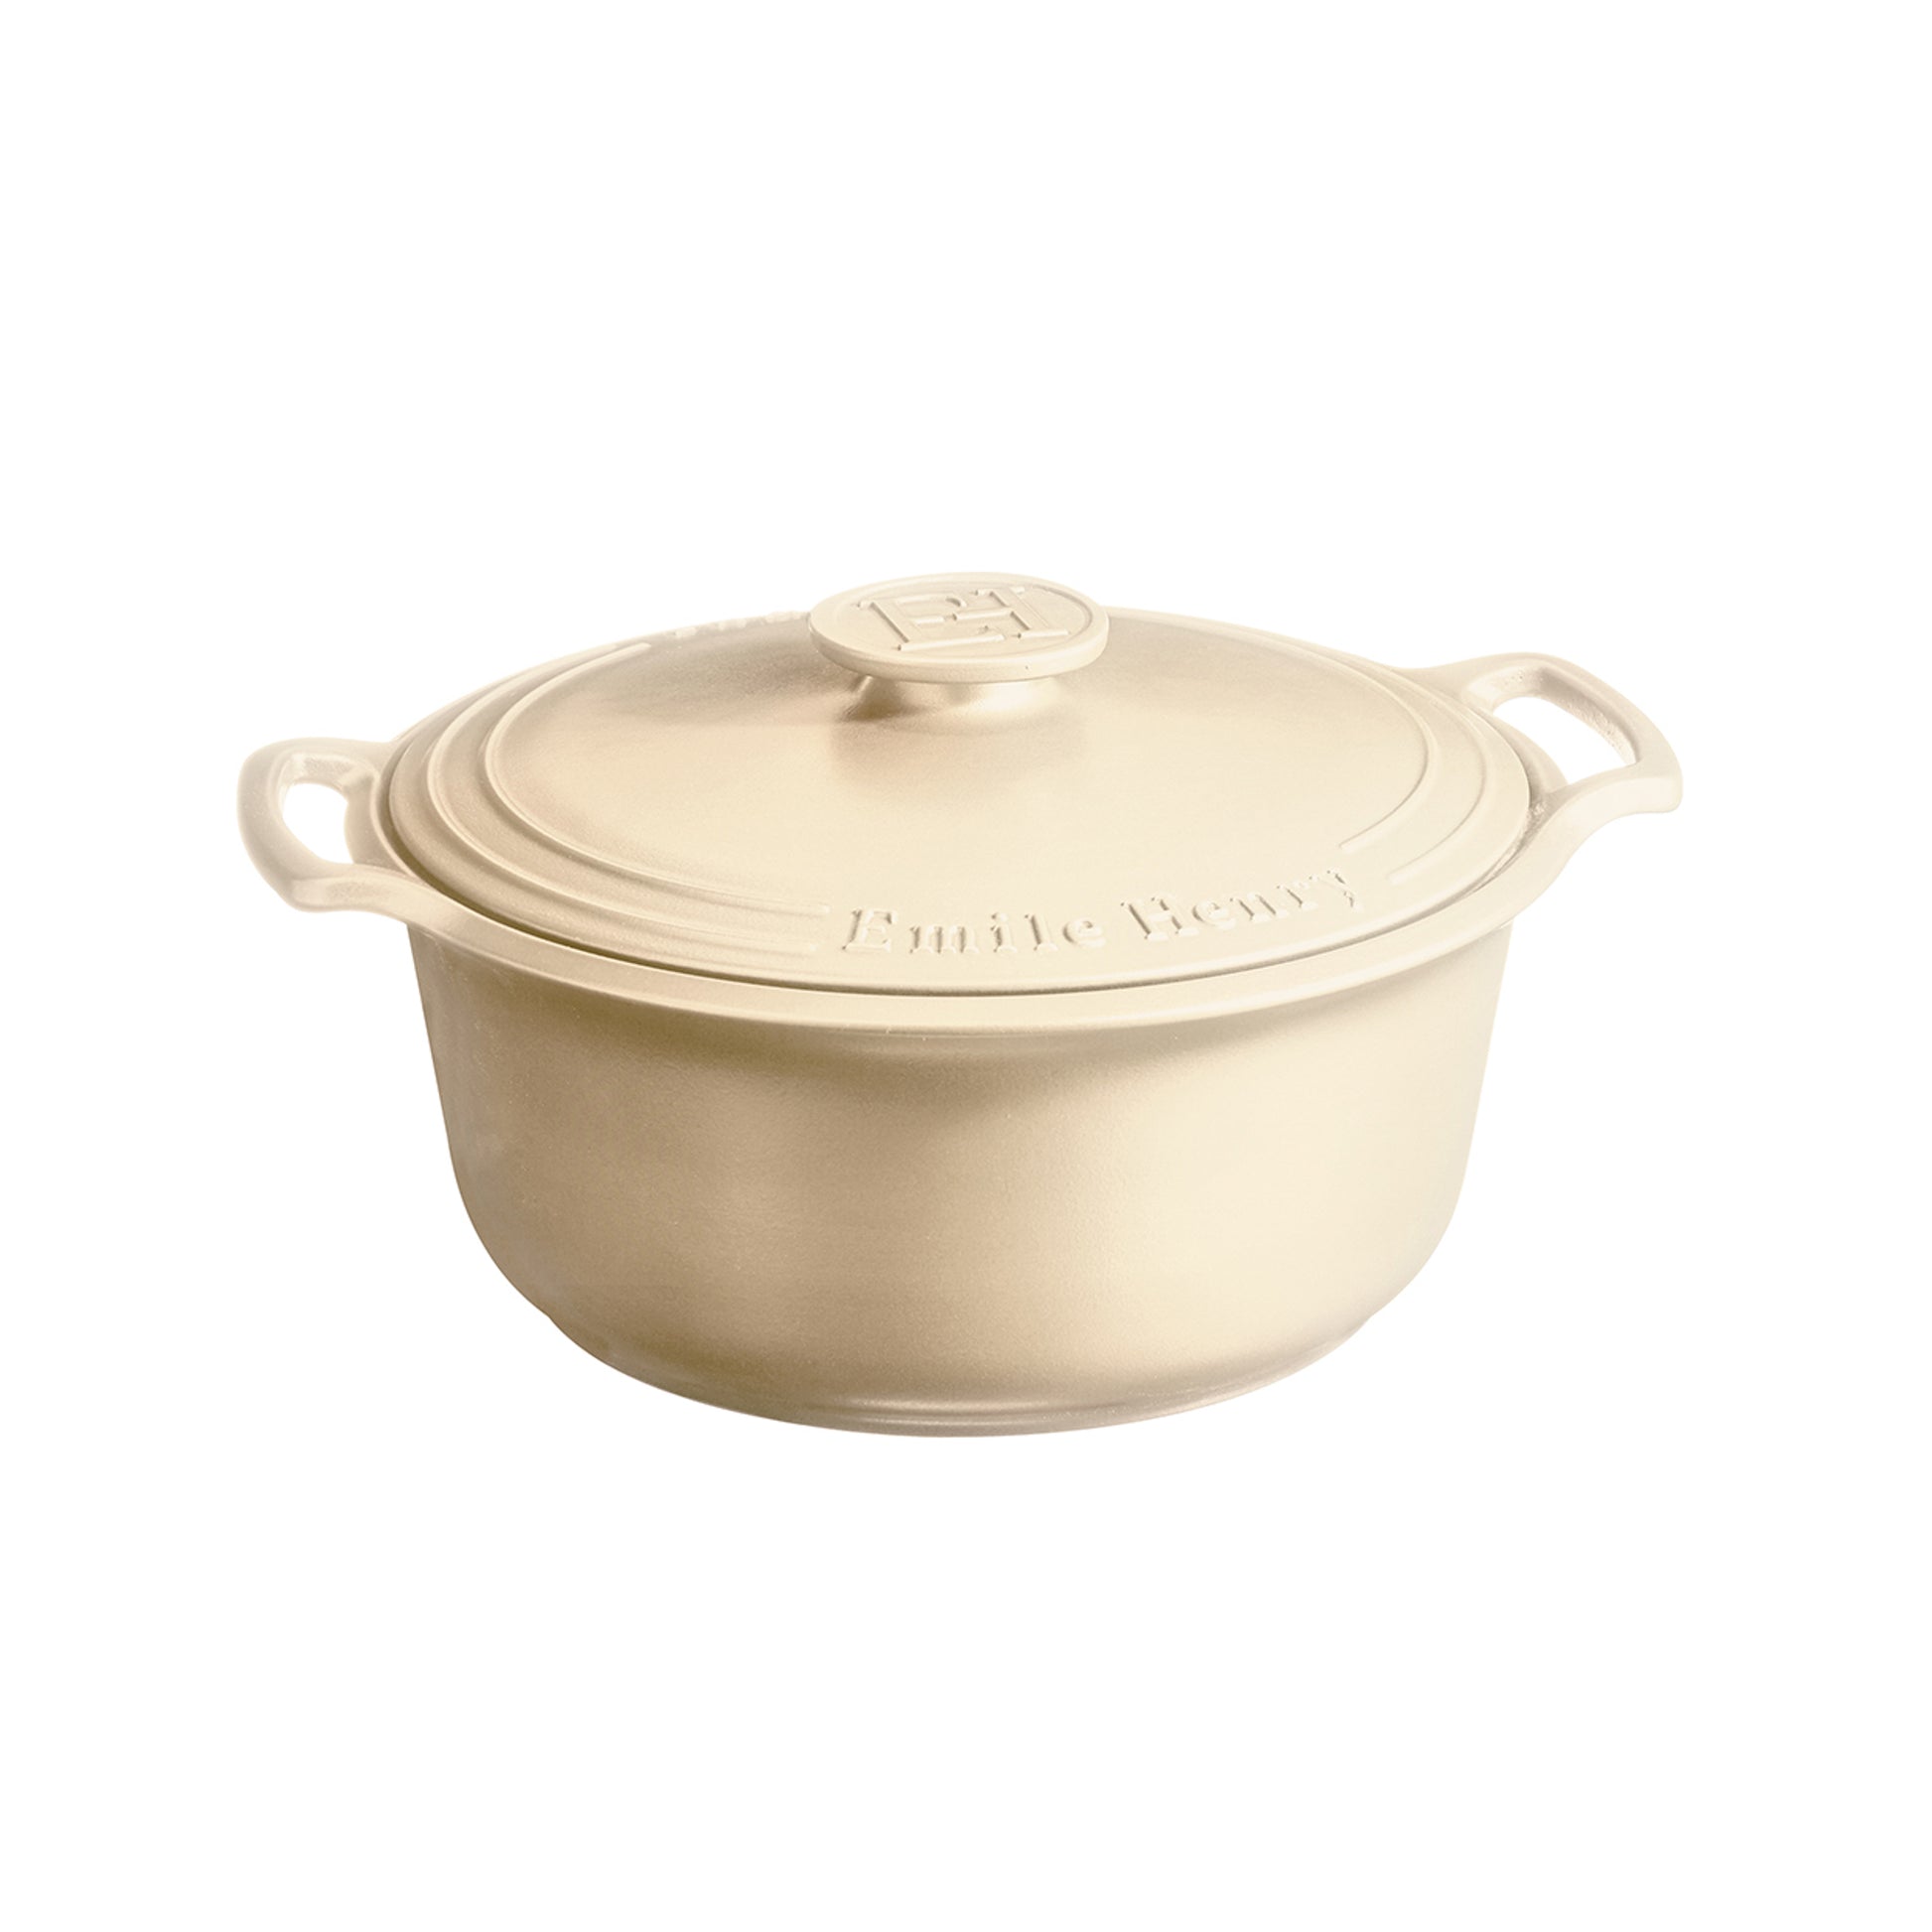 Emile Henry Sublime Dutch Oven with Lid